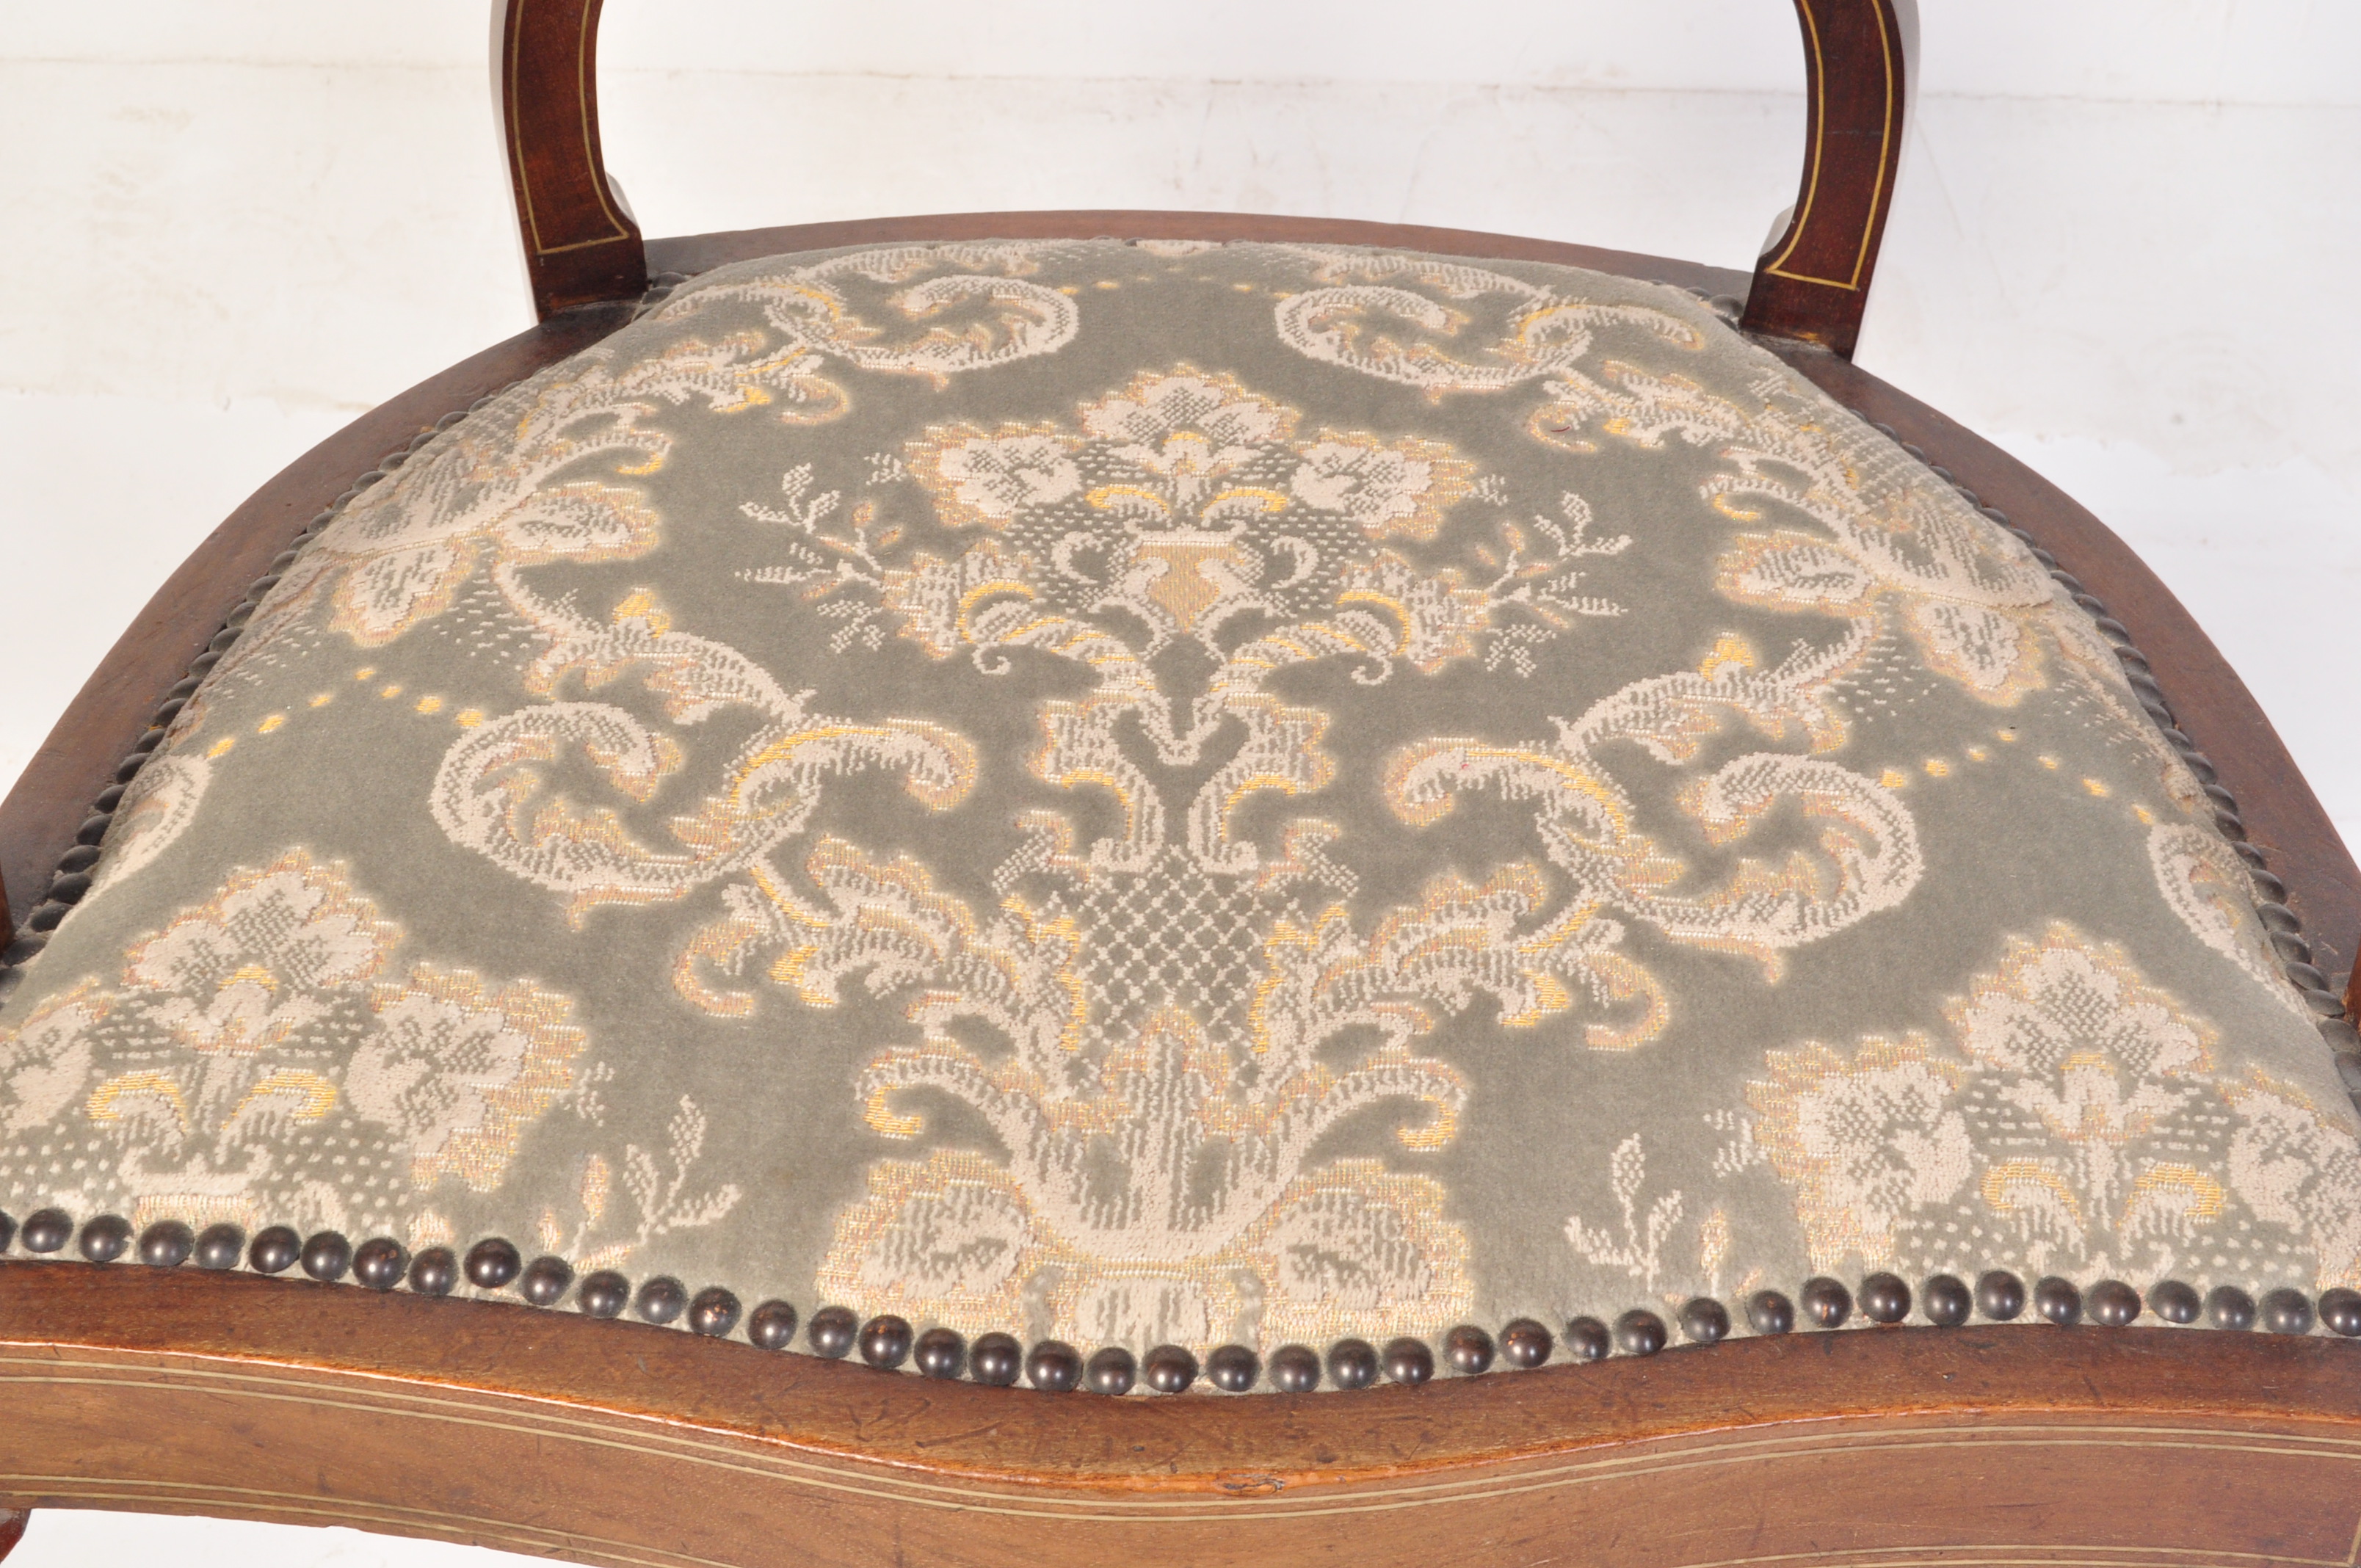 EDWARDIAN MAHOGANY AND MARQUETRY INLAID ARMCHAIR - Image 4 of 4